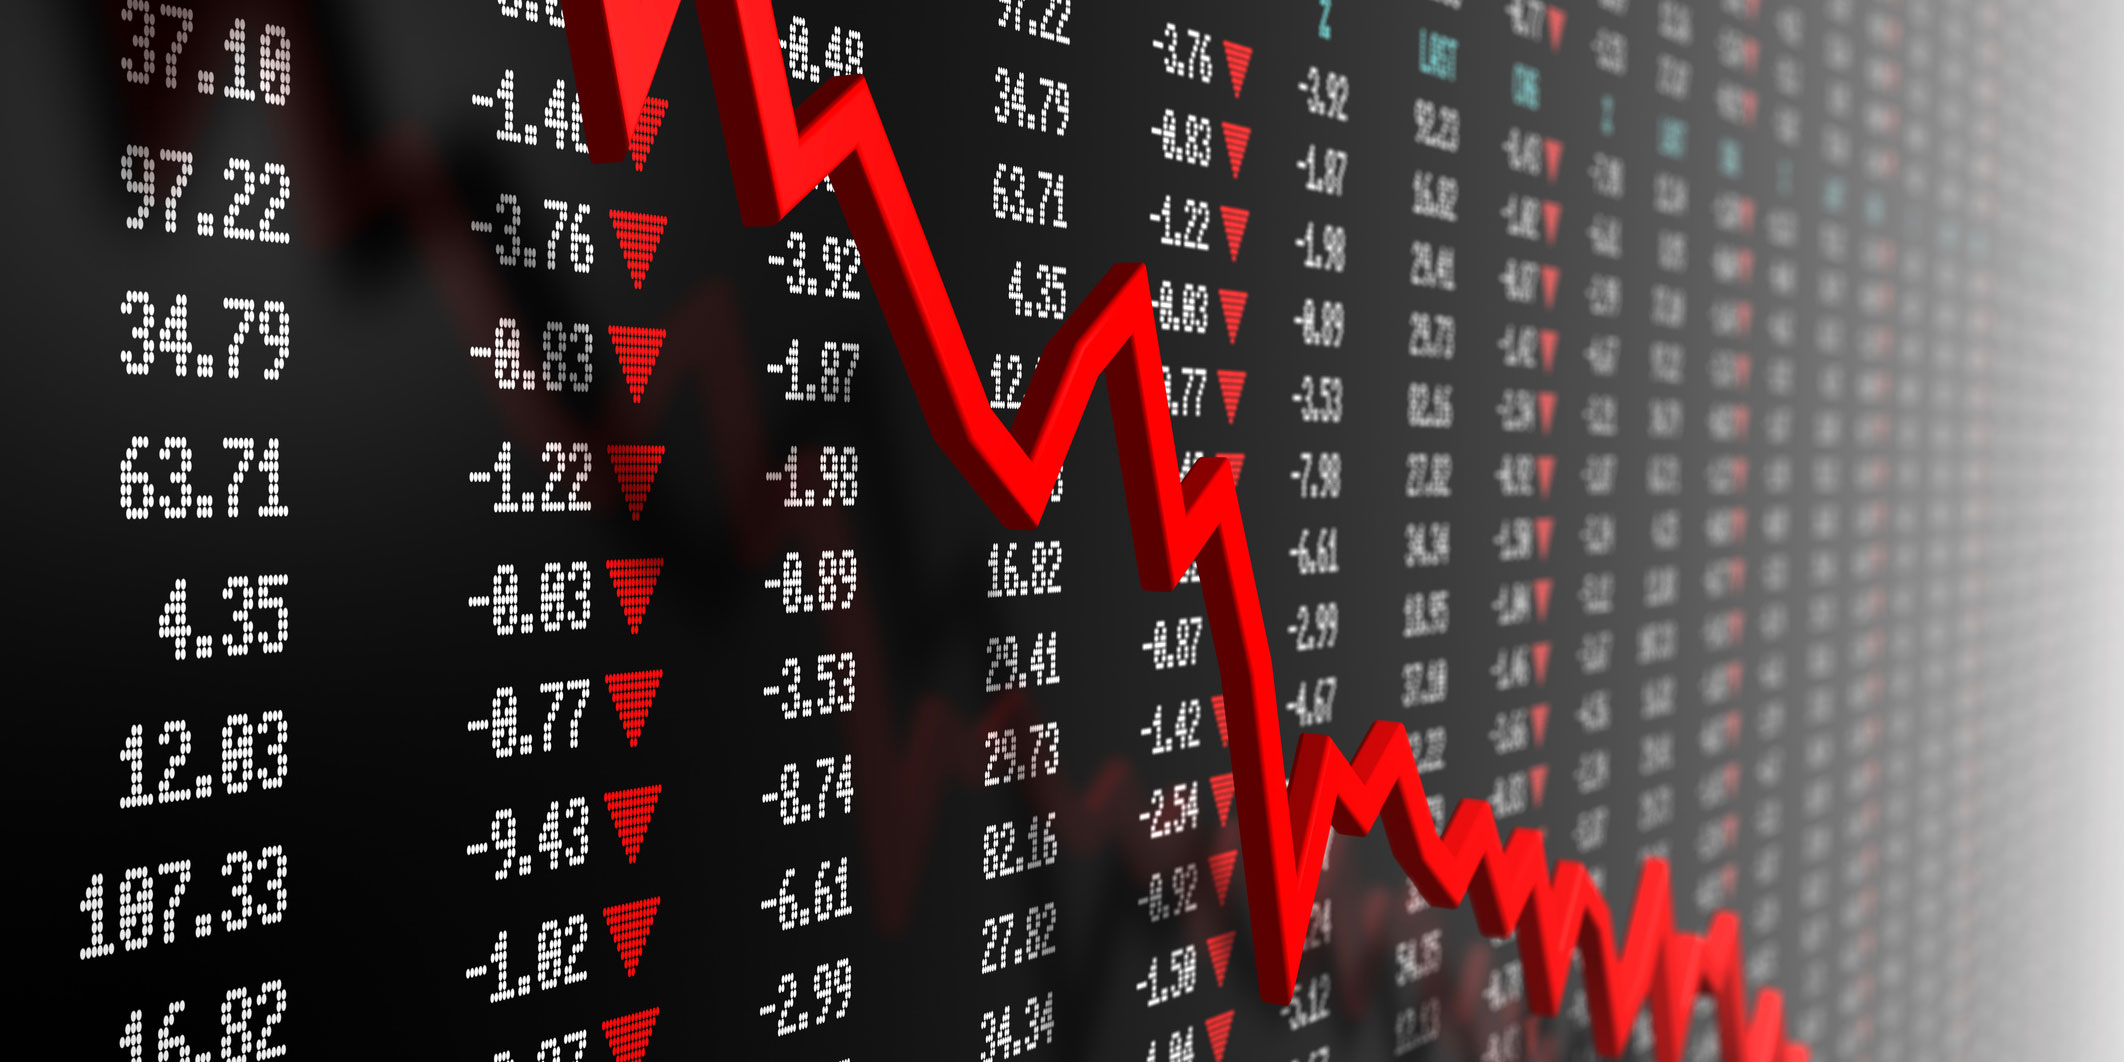 what was the major reason of the stock market crash